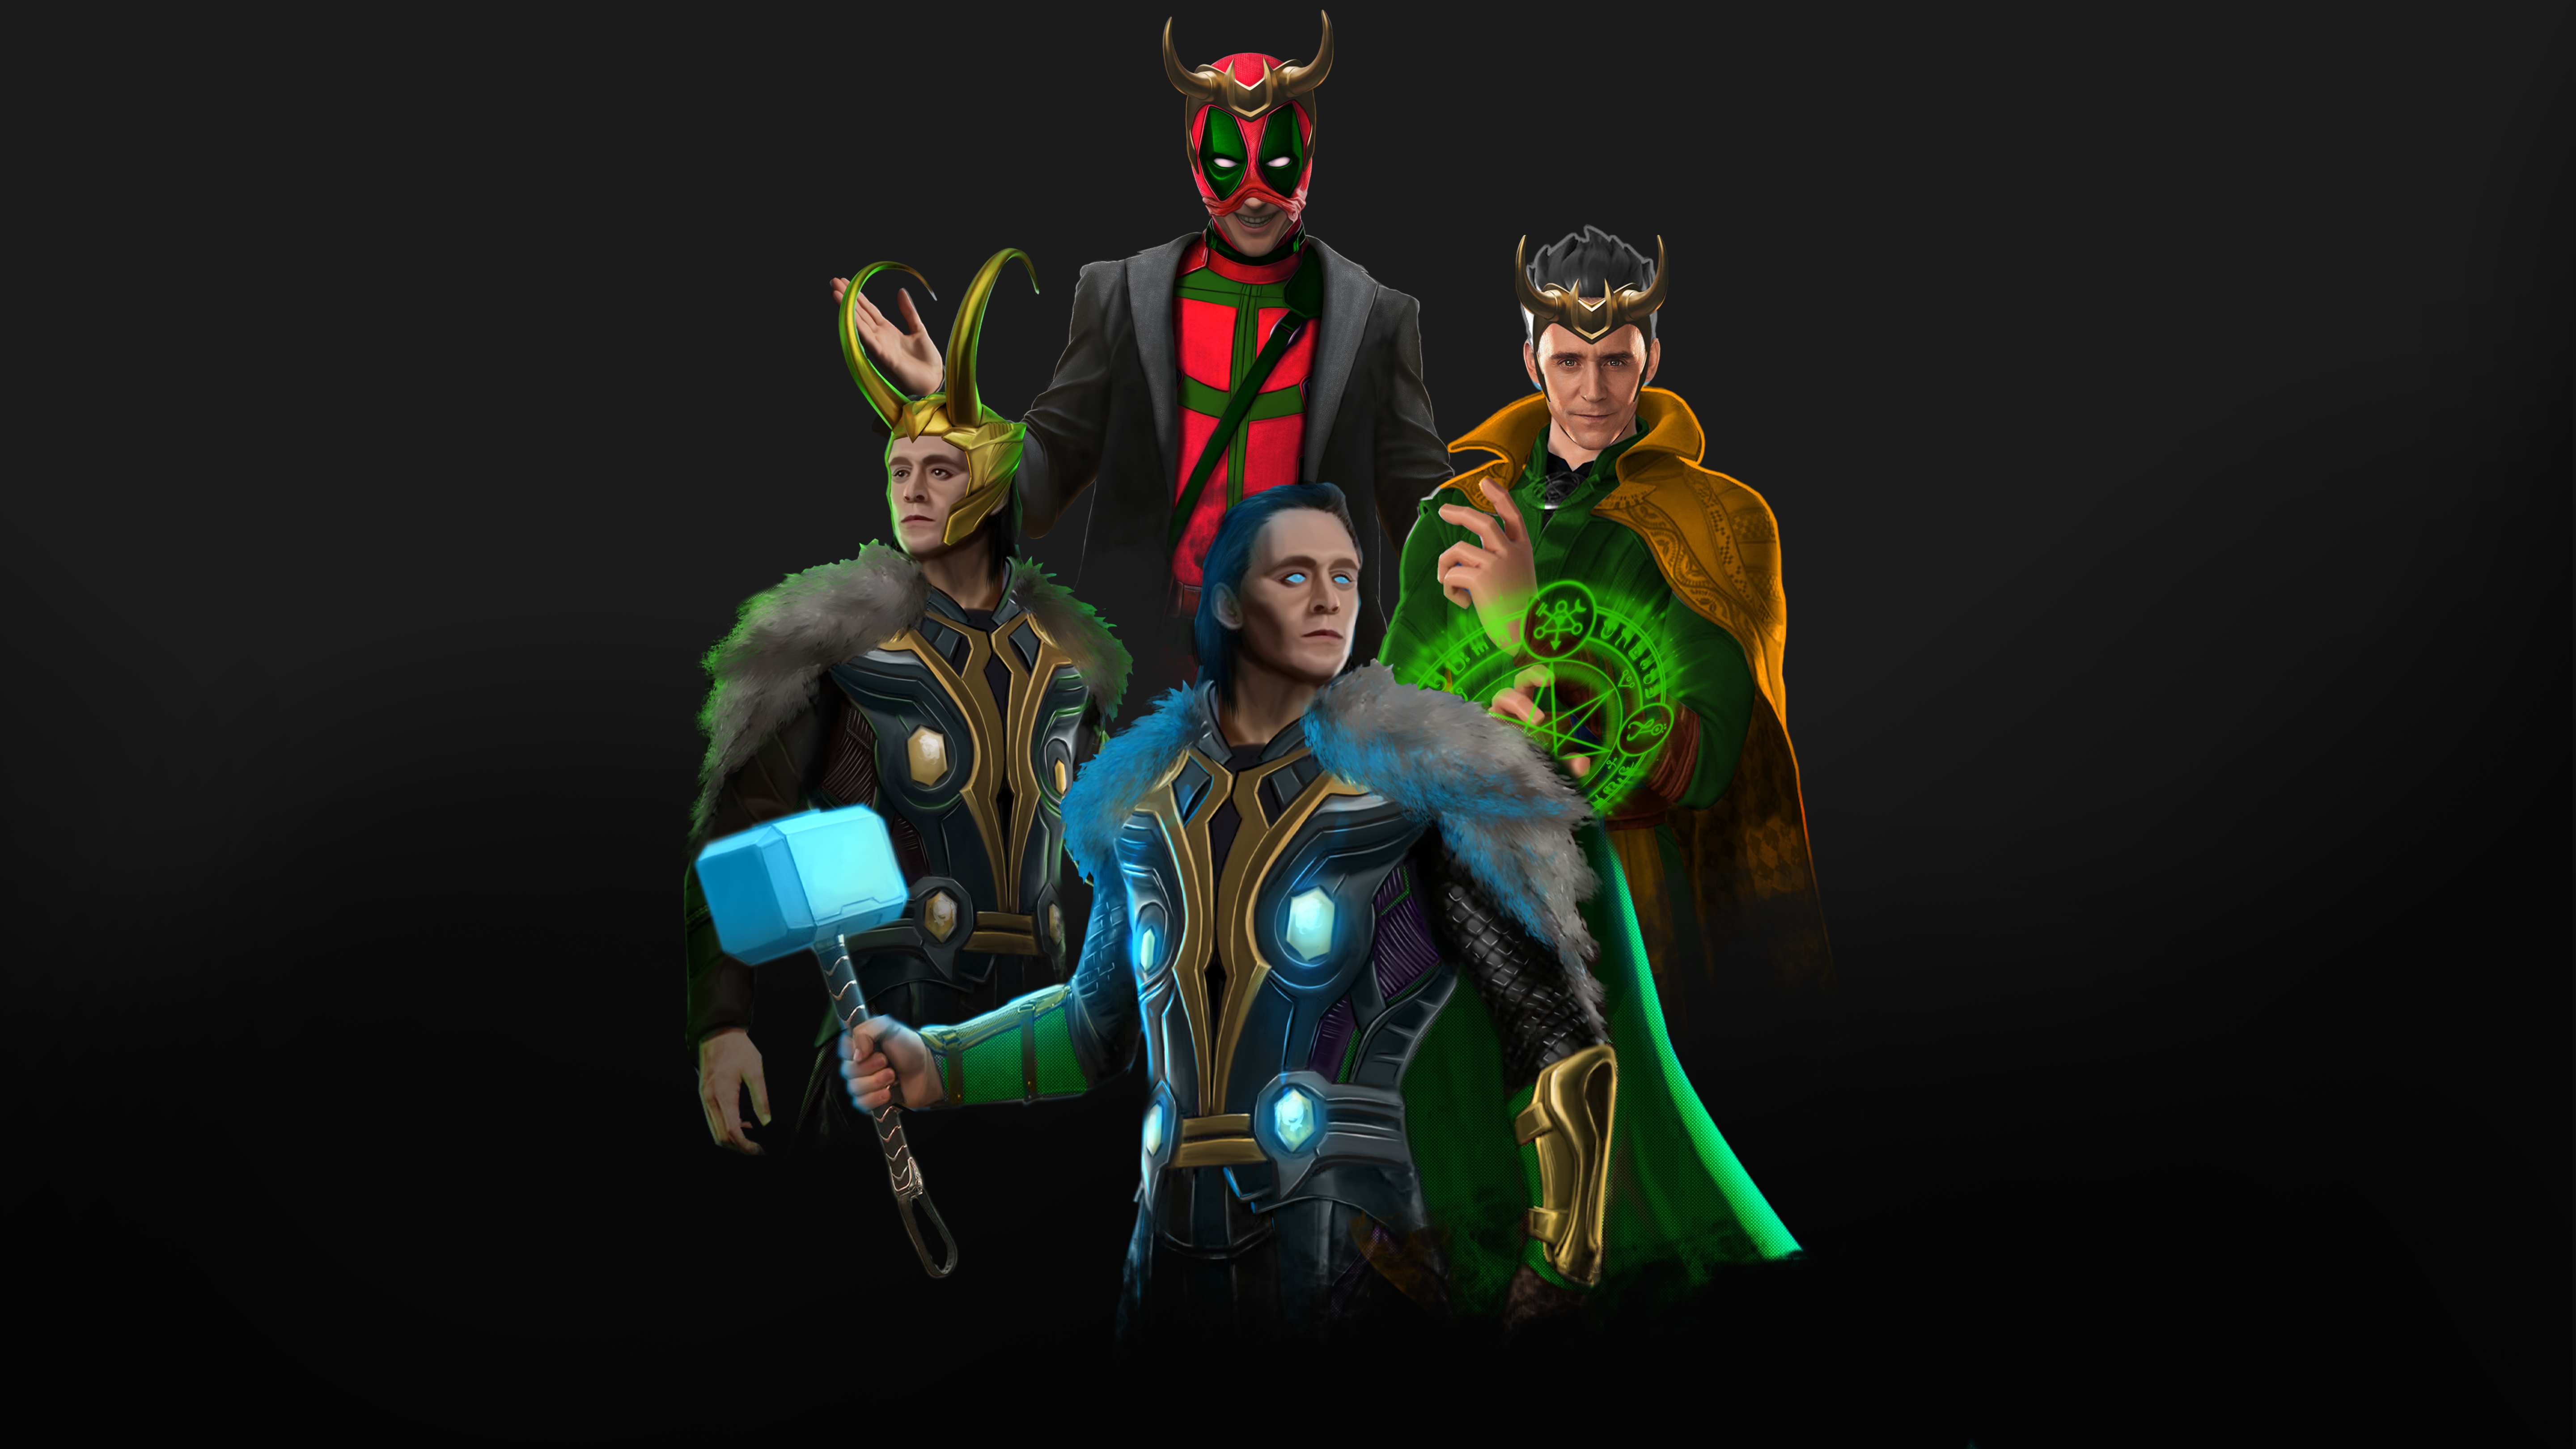 The council of Loki by erART